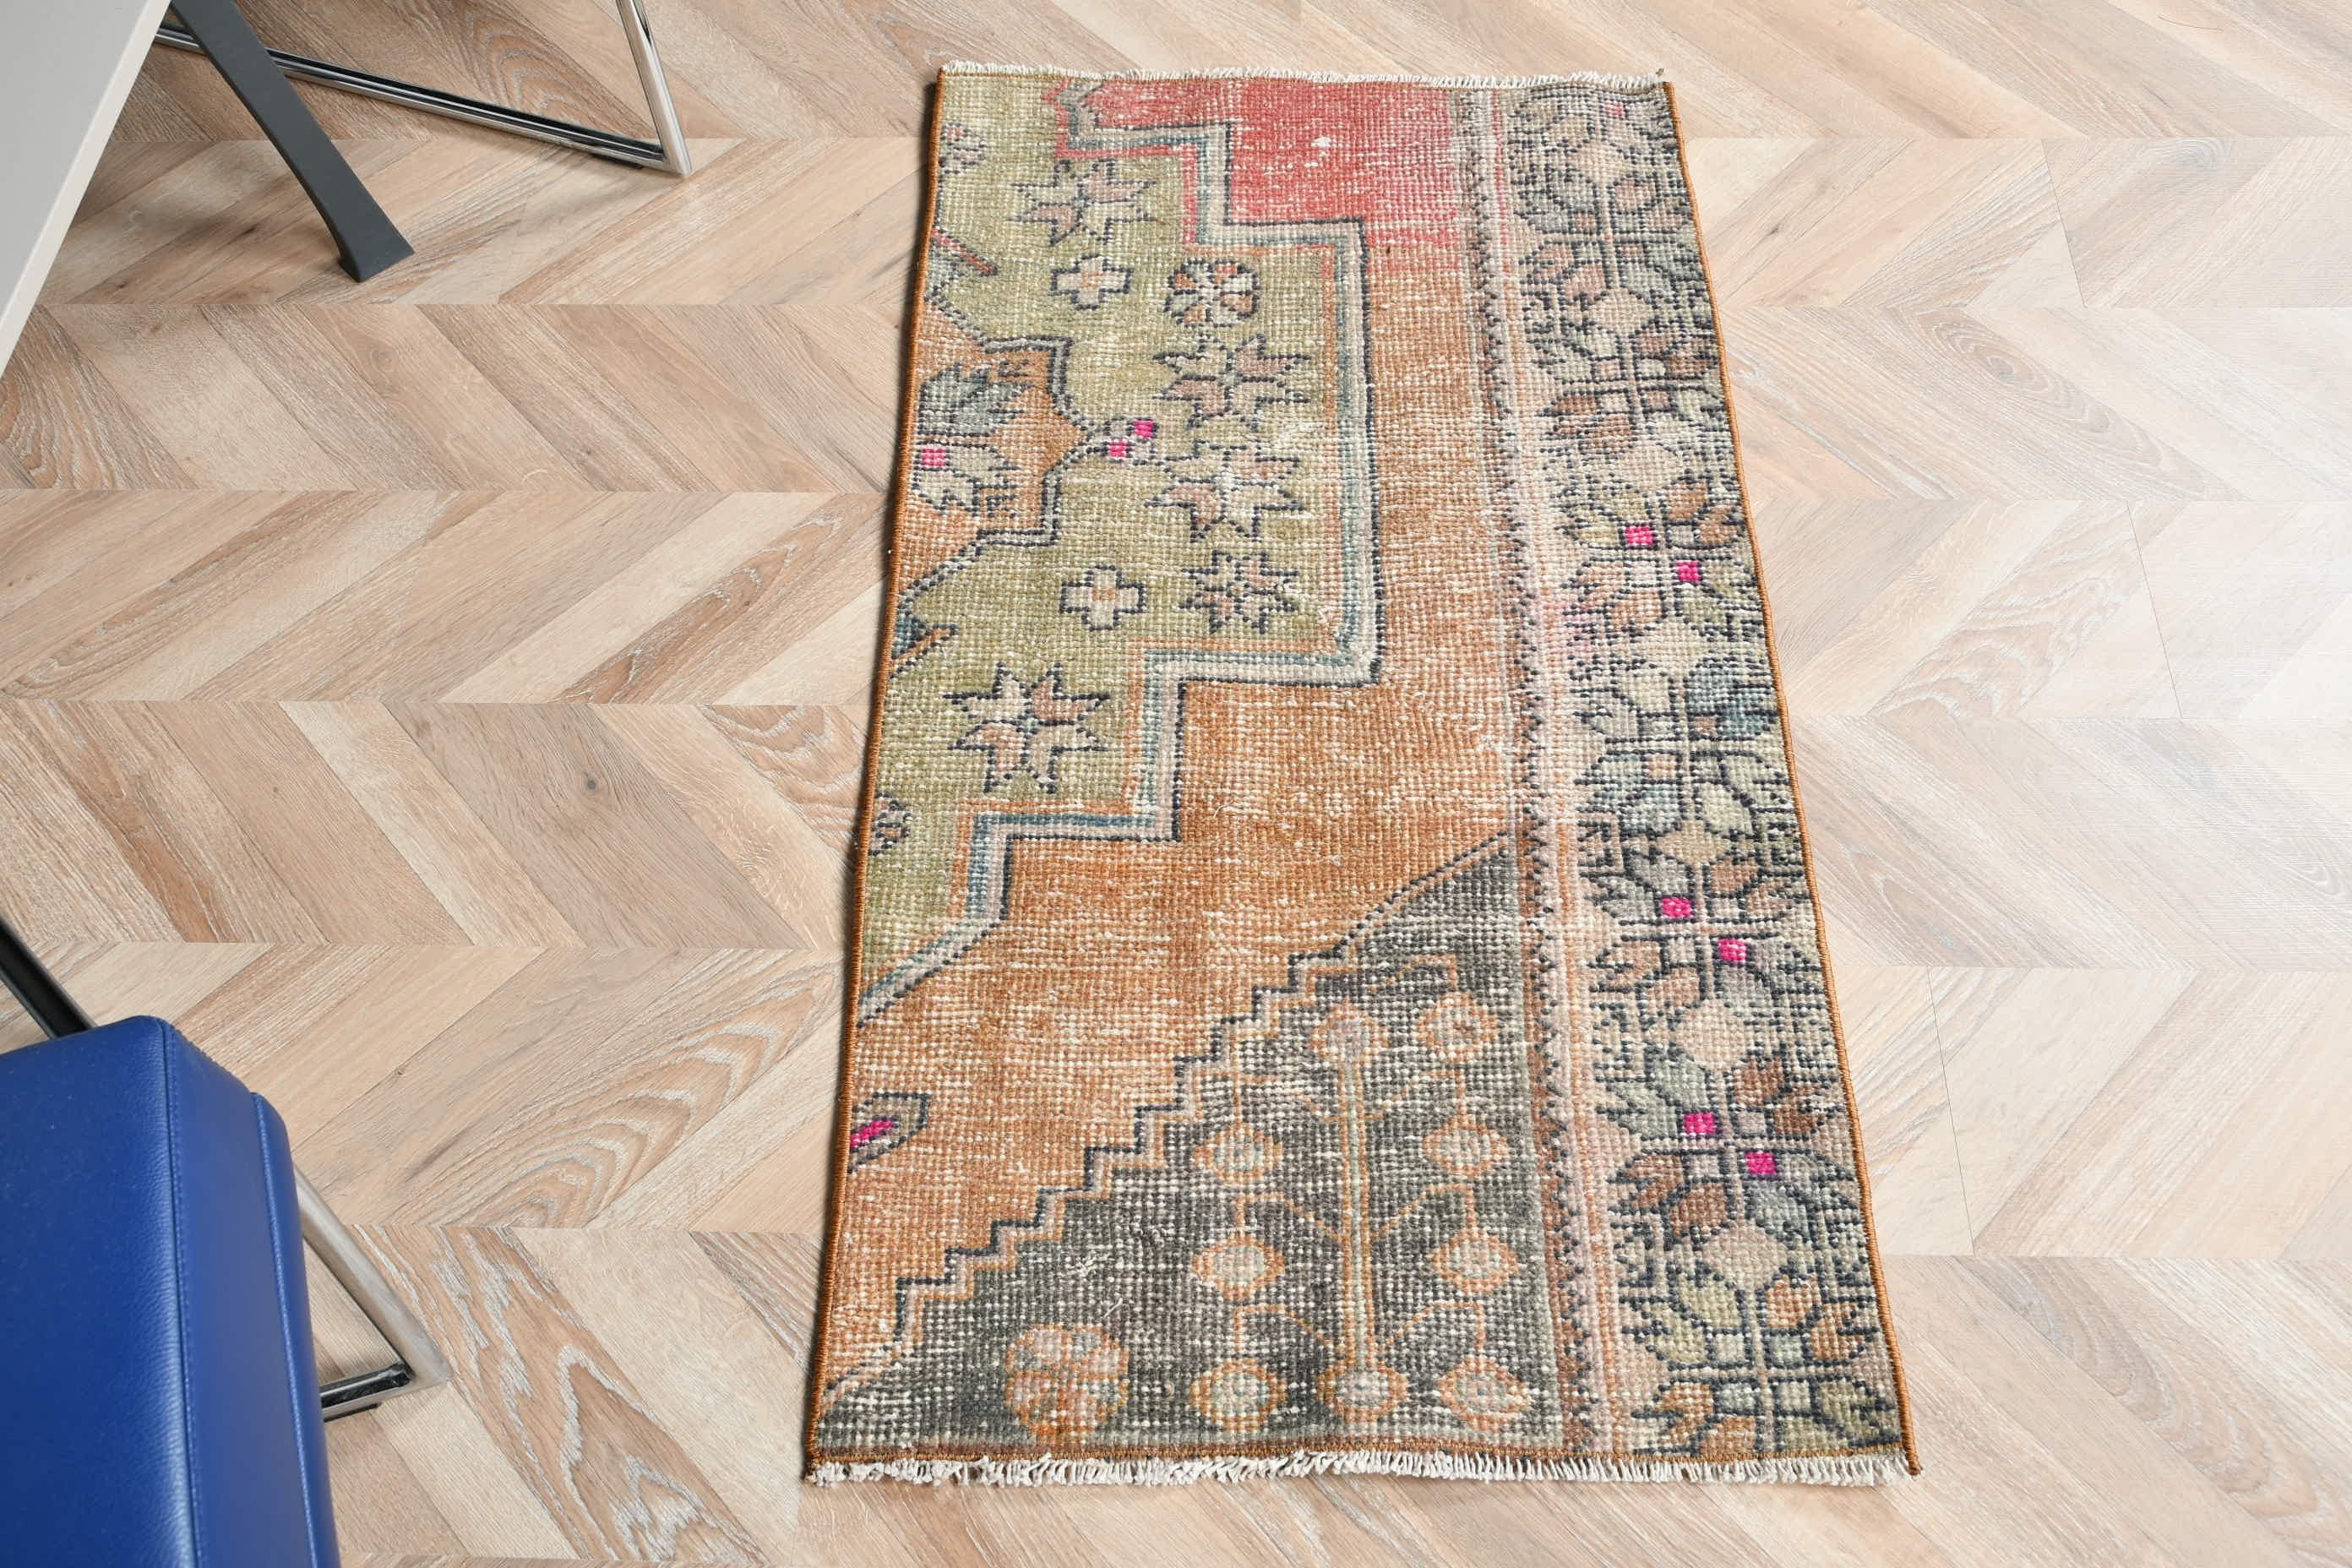 Rugs for Bedroom, Kitchen Rugs, Vintage Rug, 2x3.8 ft Small Rug, Floor Rug, Car Mat Rugs, Brown Moroccan Rug, Turkish Rug, Home Decor Rugs